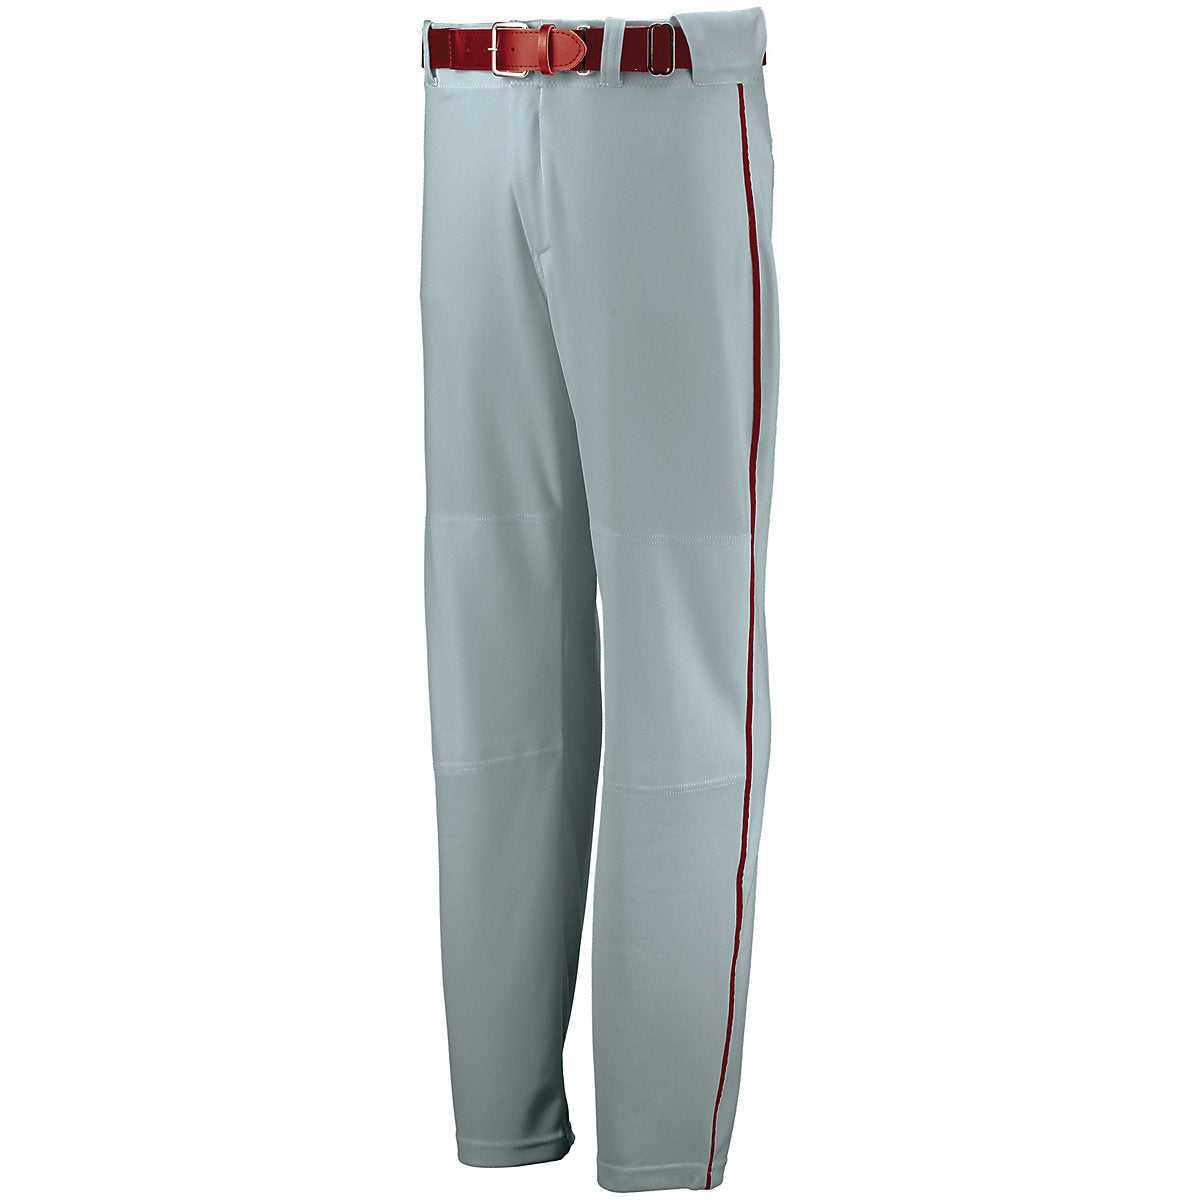 Russell 233L2B Youth Open Bottom Piped Pant - Baseball Grey True Red - HIT a Double